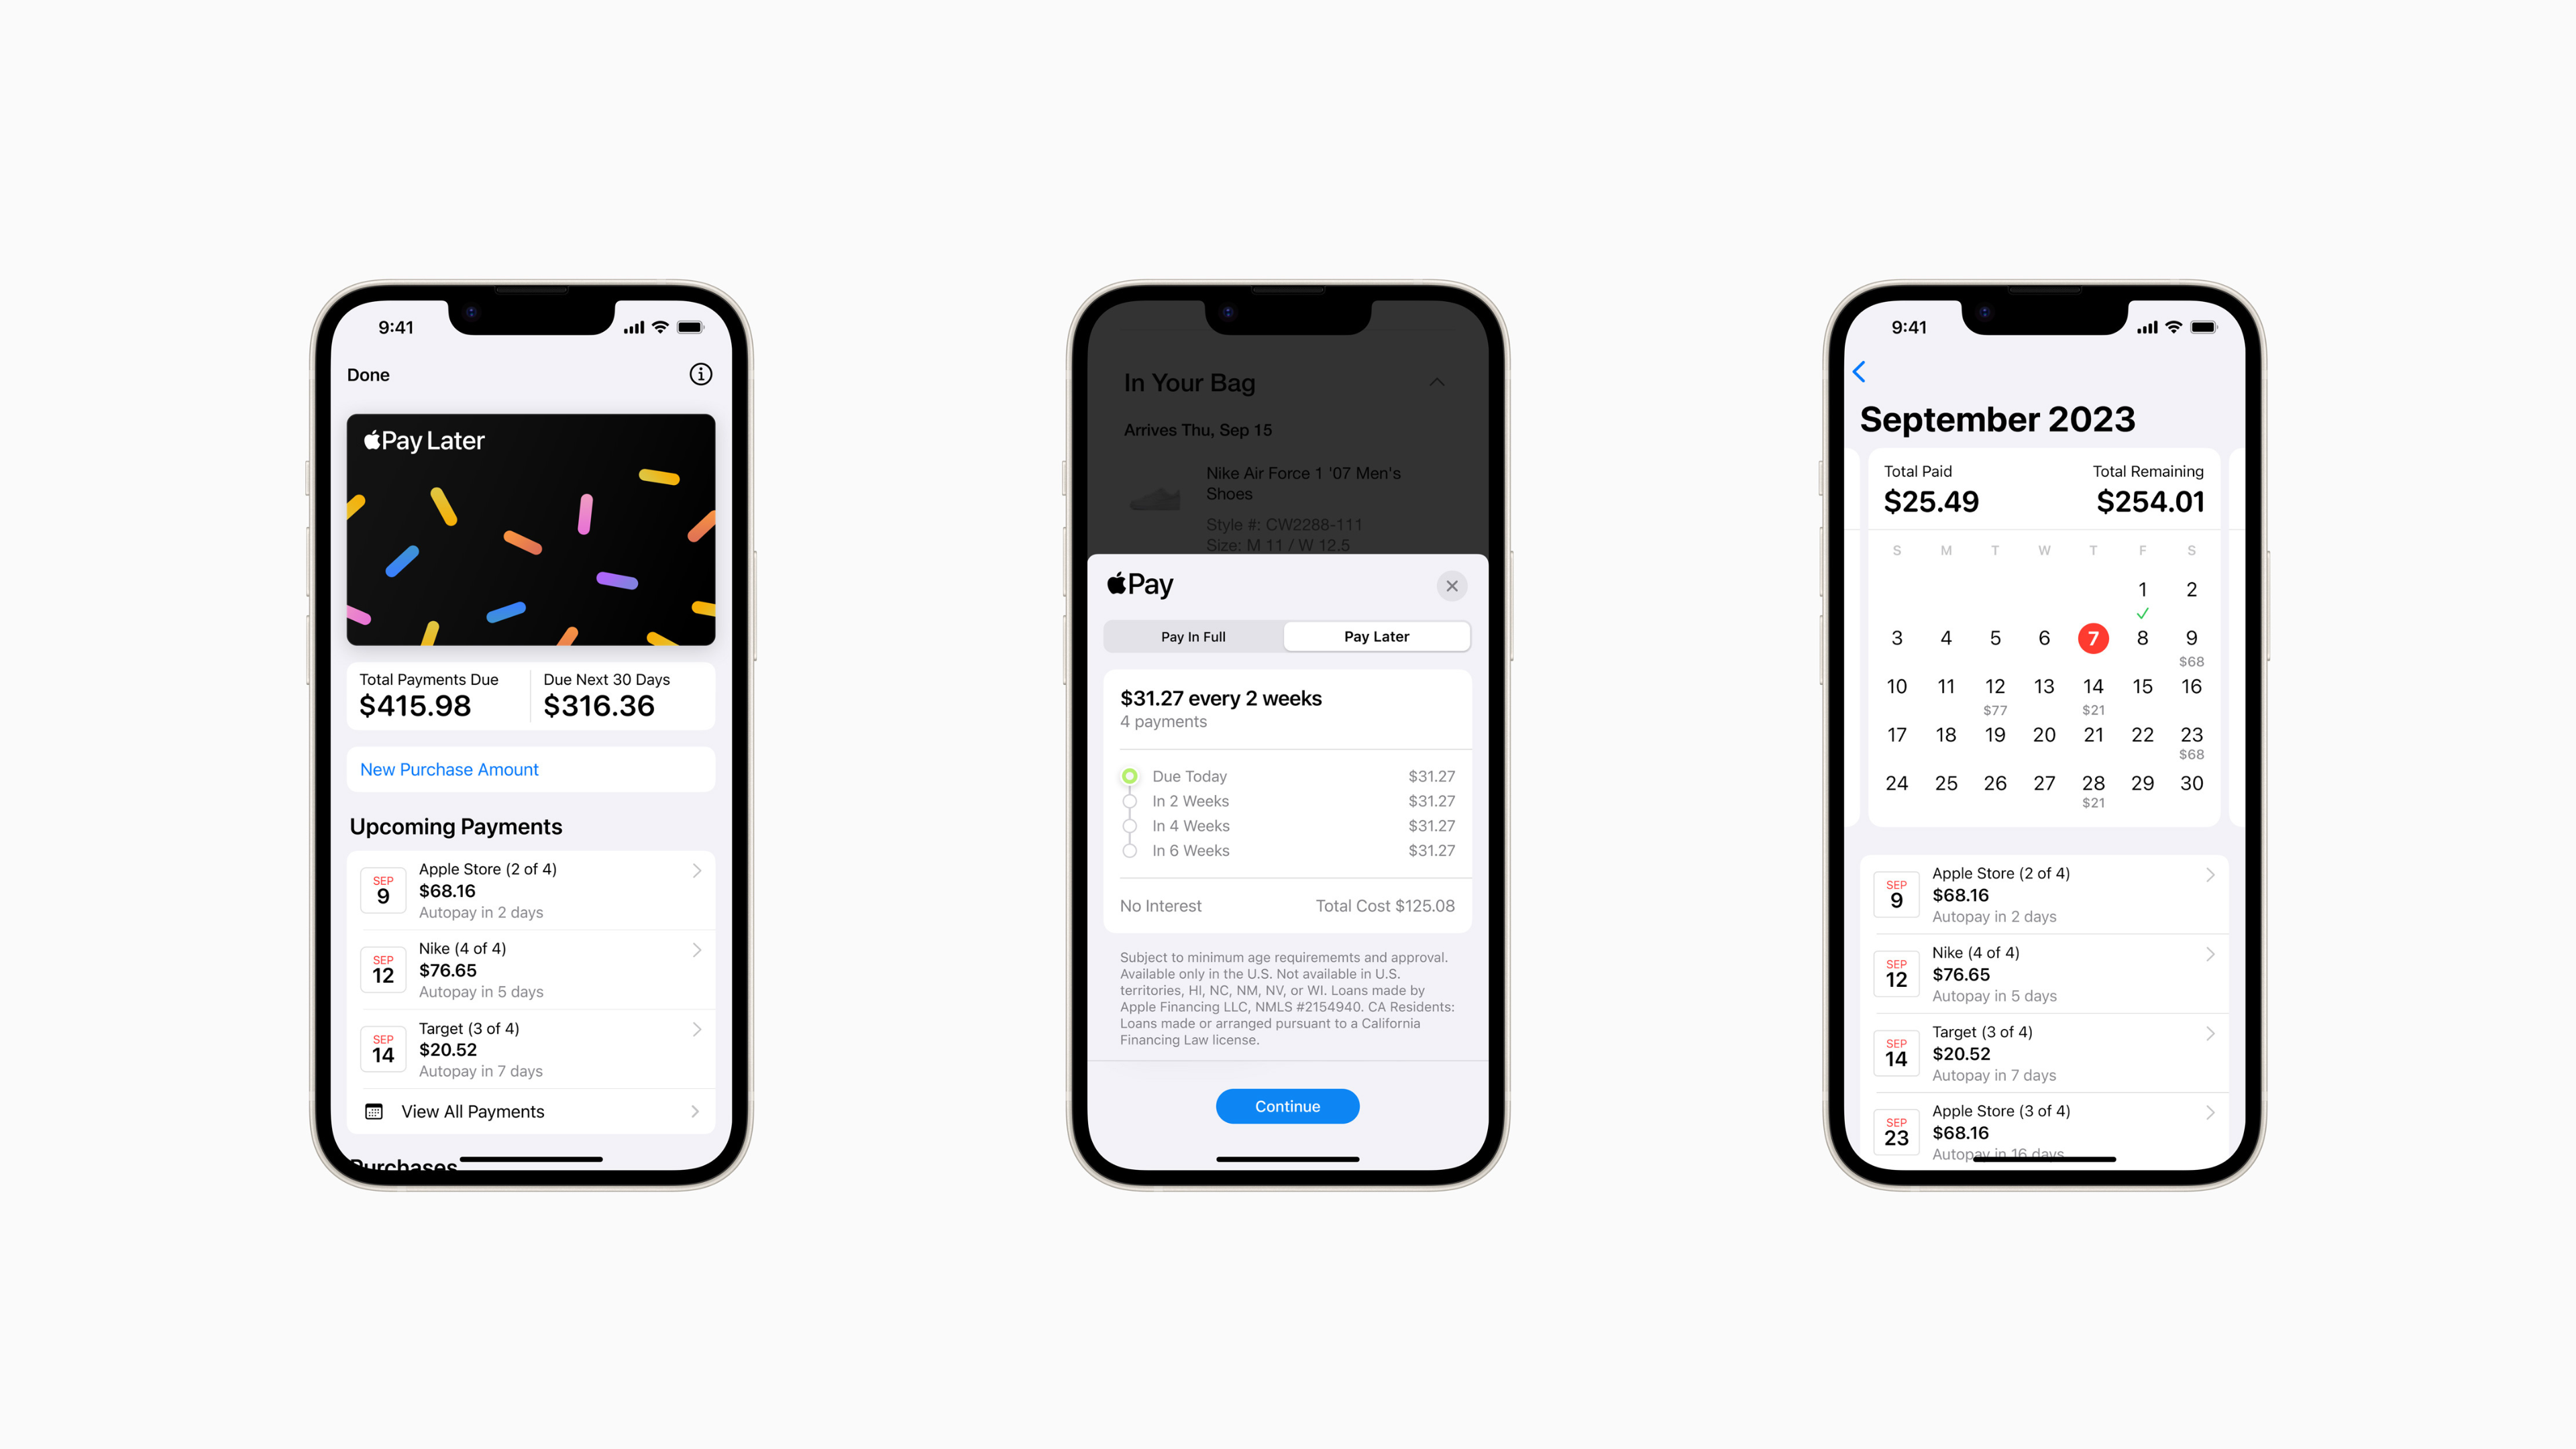 Apple Pay Later screens showing how the app works